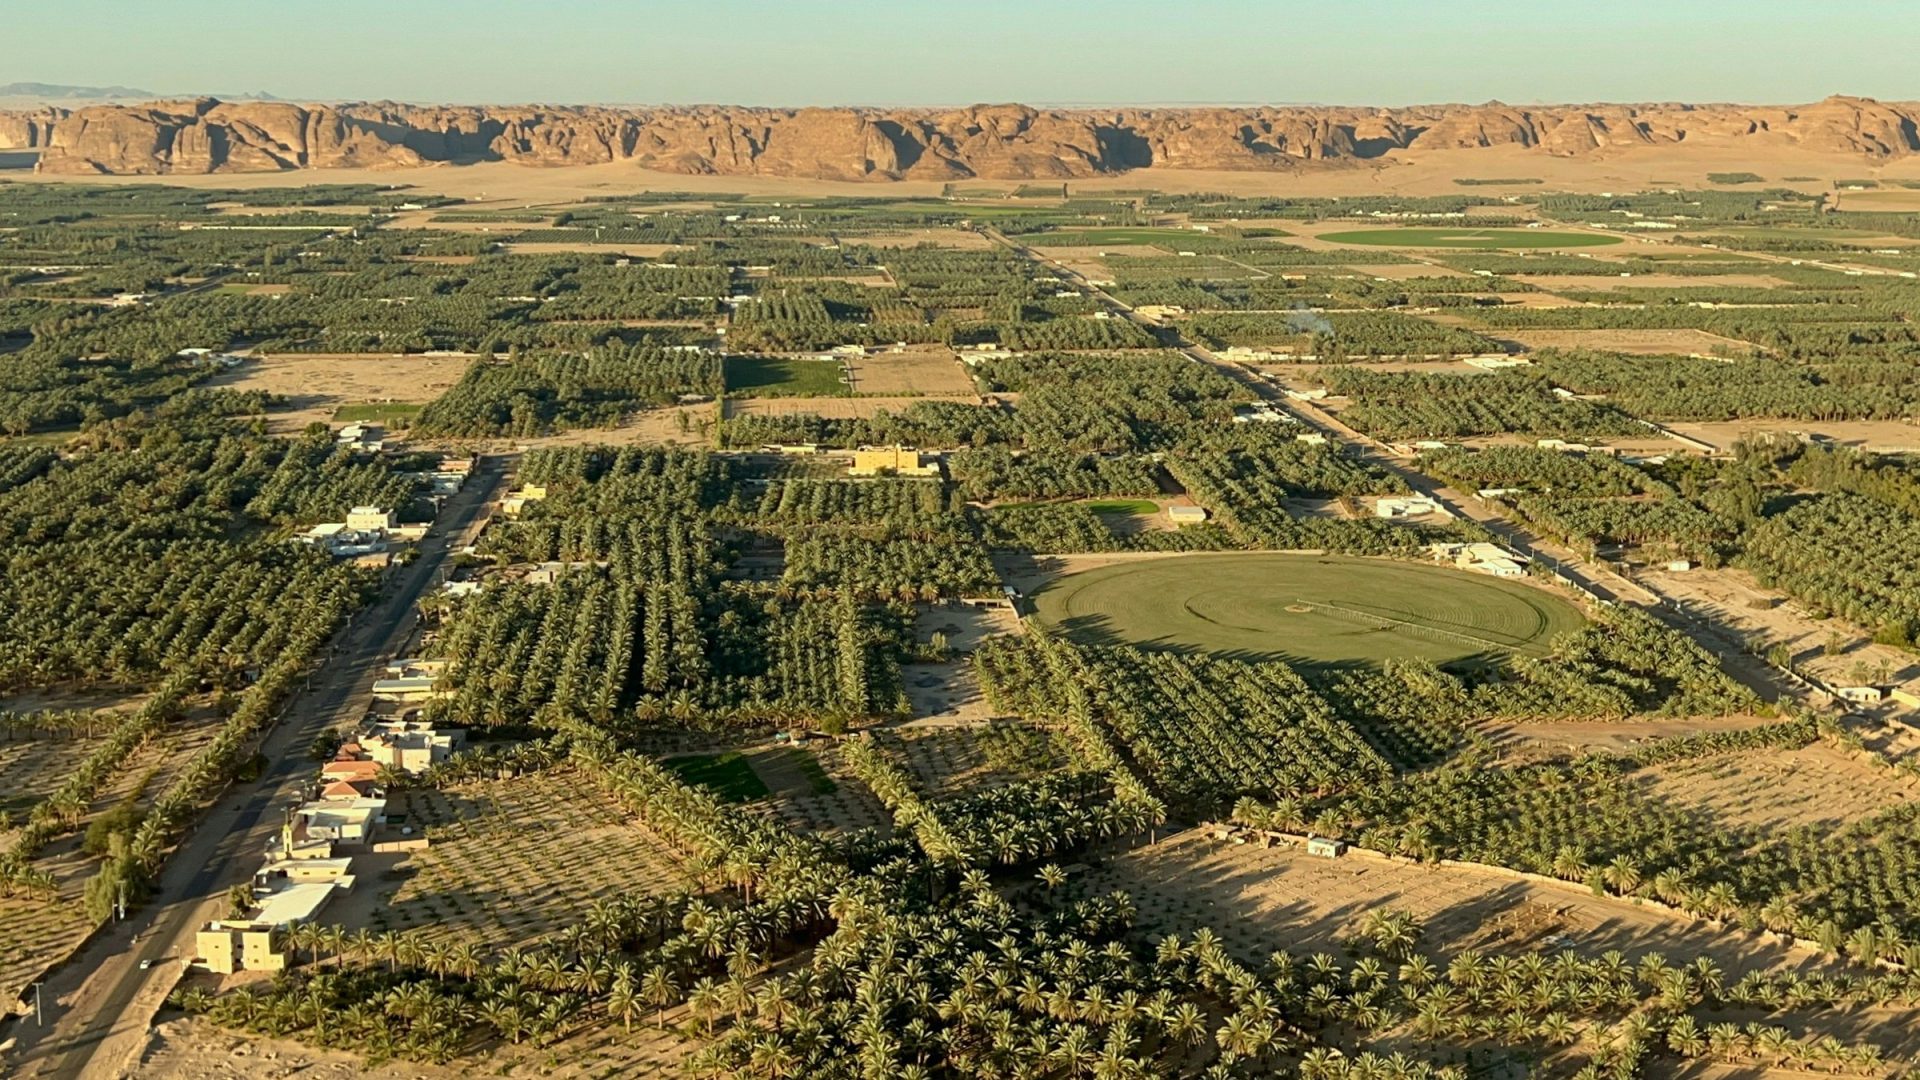 An aerial view over palm tree fields against a desert backdrop